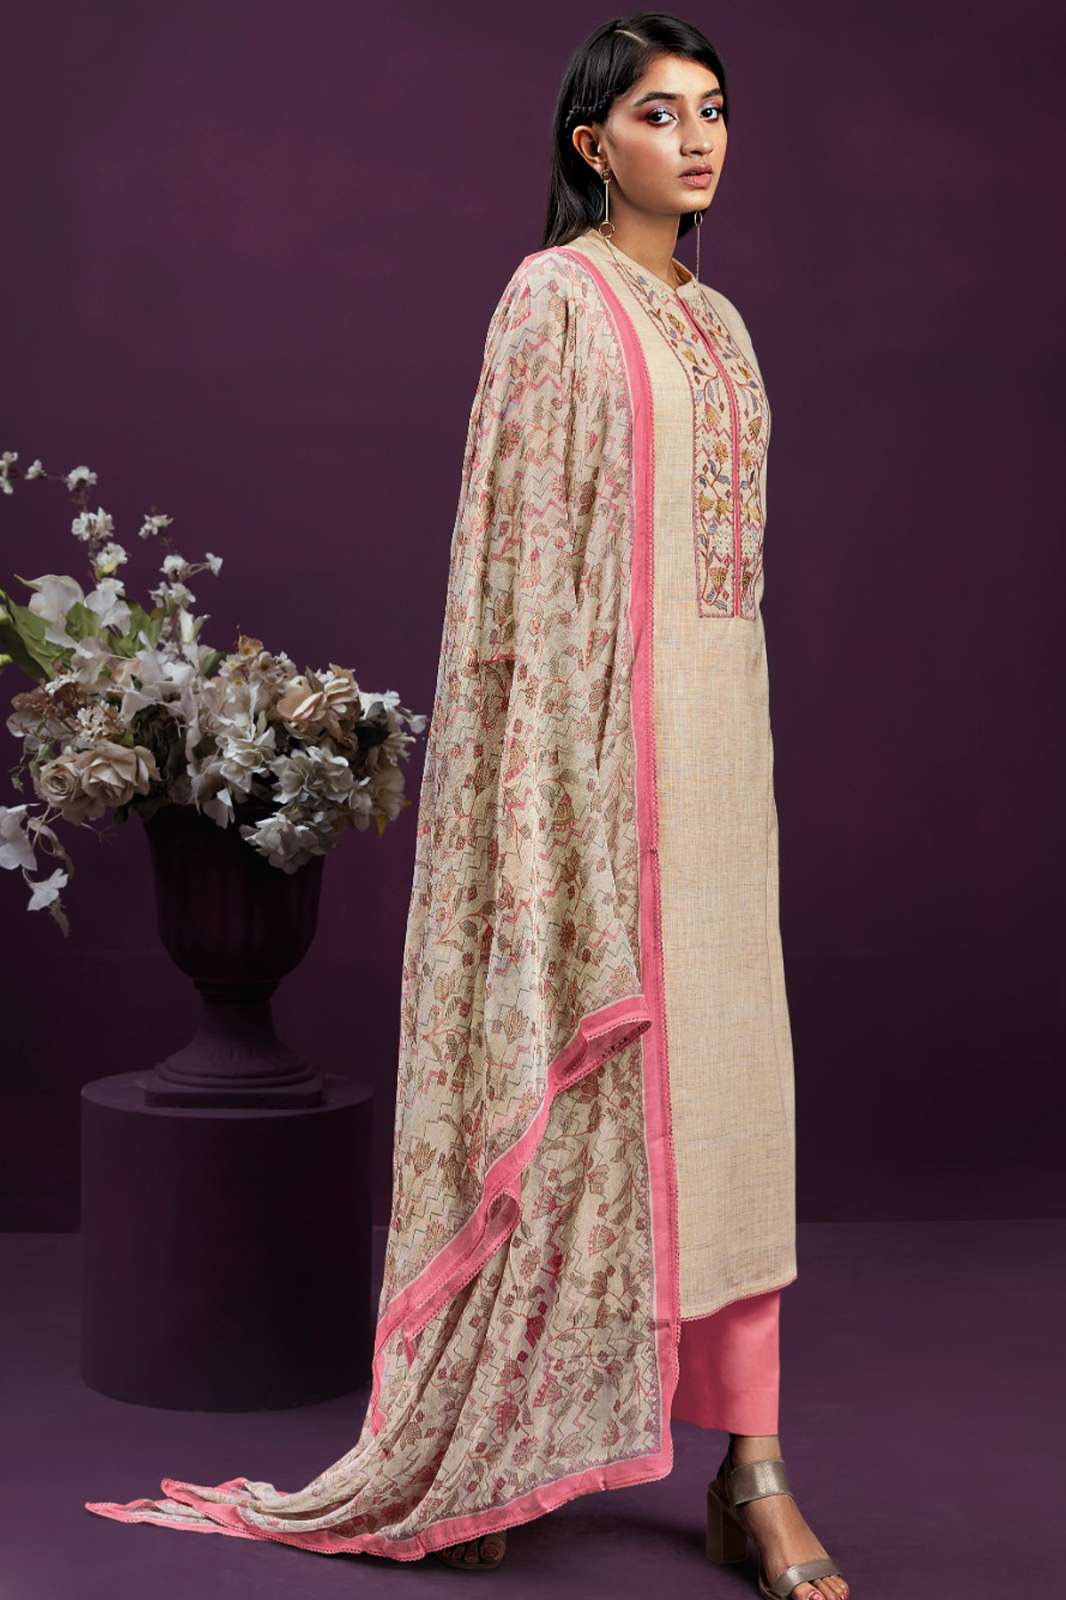 GANGA 800 PREMIUM WOVEN COTTON SUIT WITH EMBROIDERY & HAND WORK 